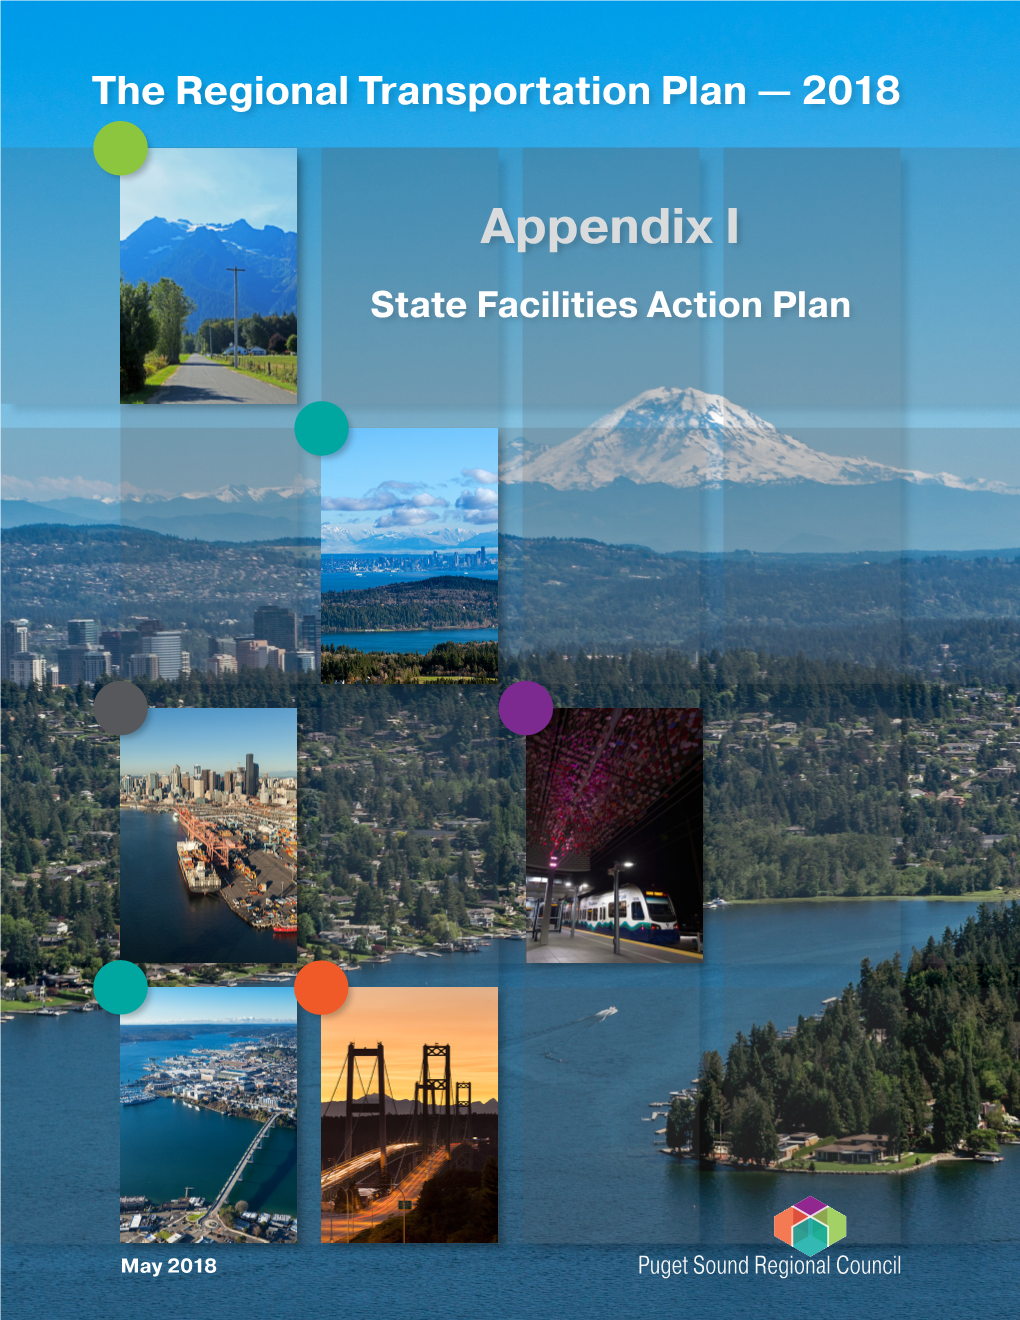 State Facilities Action Plan